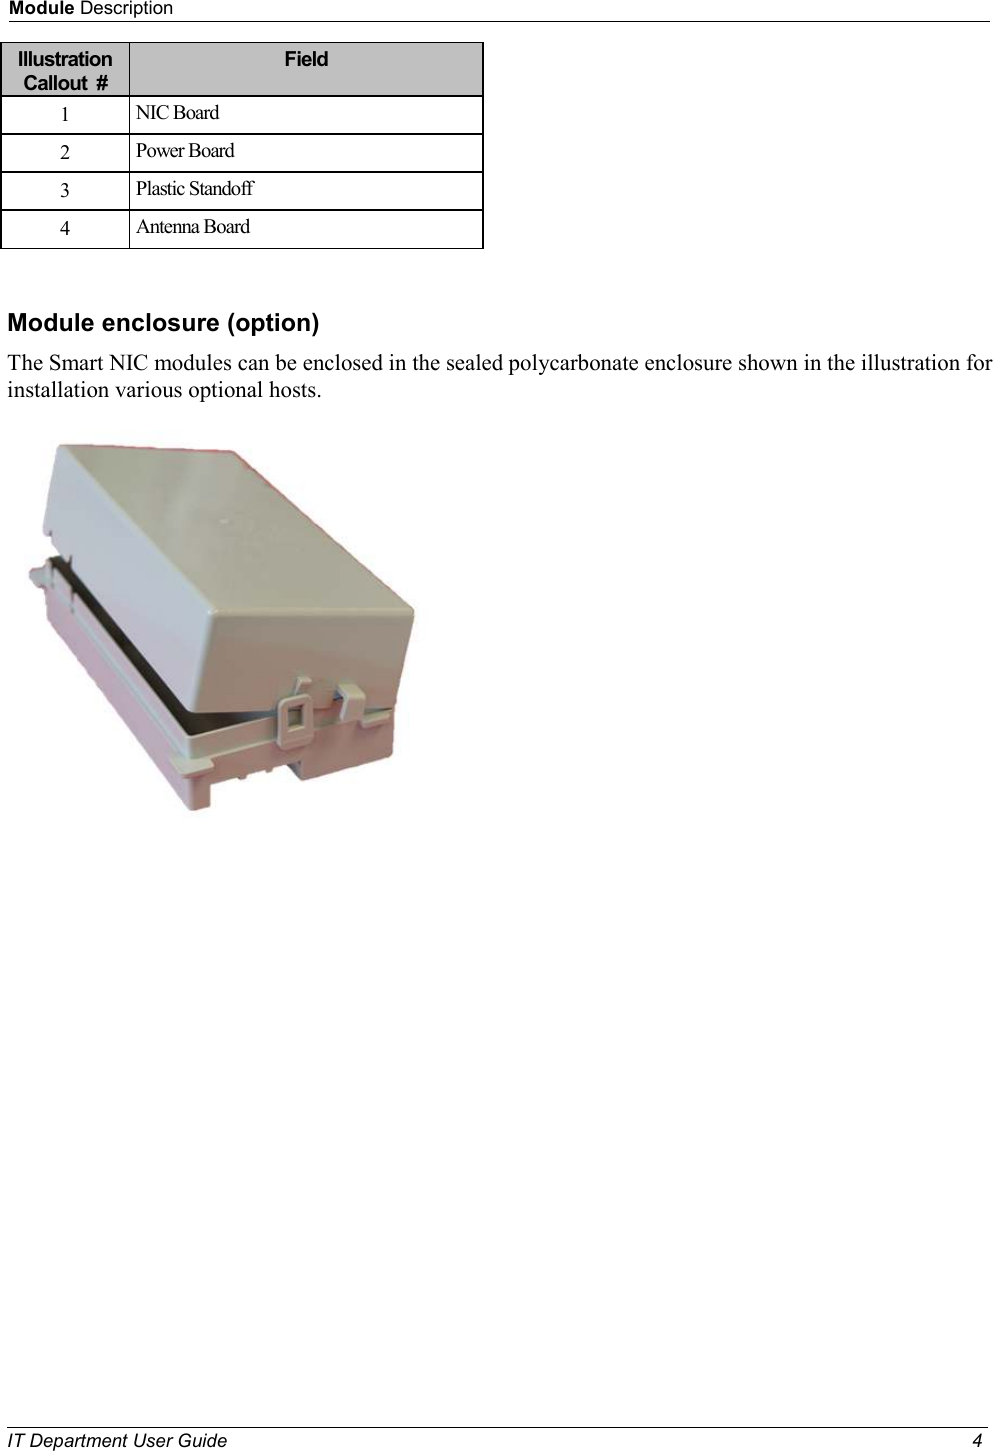 Module Description  IT Department User Guide  4      Illustration Callout  # Field 1  NIC Board 2  Power Board 3  Plastic Standoff  4  Antenna Board   Module enclosure (option) The Smart NIC modules can be enclosed in the sealed polycarbonate enclosure shown in the illustration for installation various optional hosts.   